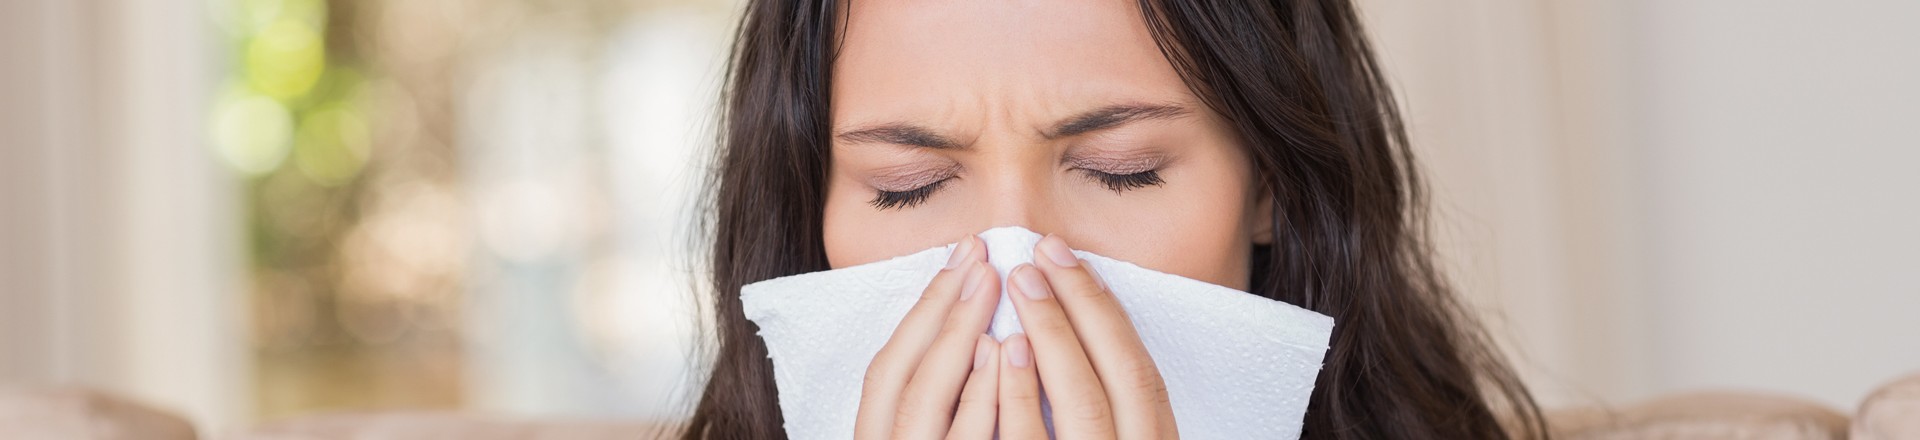 woman with allergies blowing her nose with a tissue